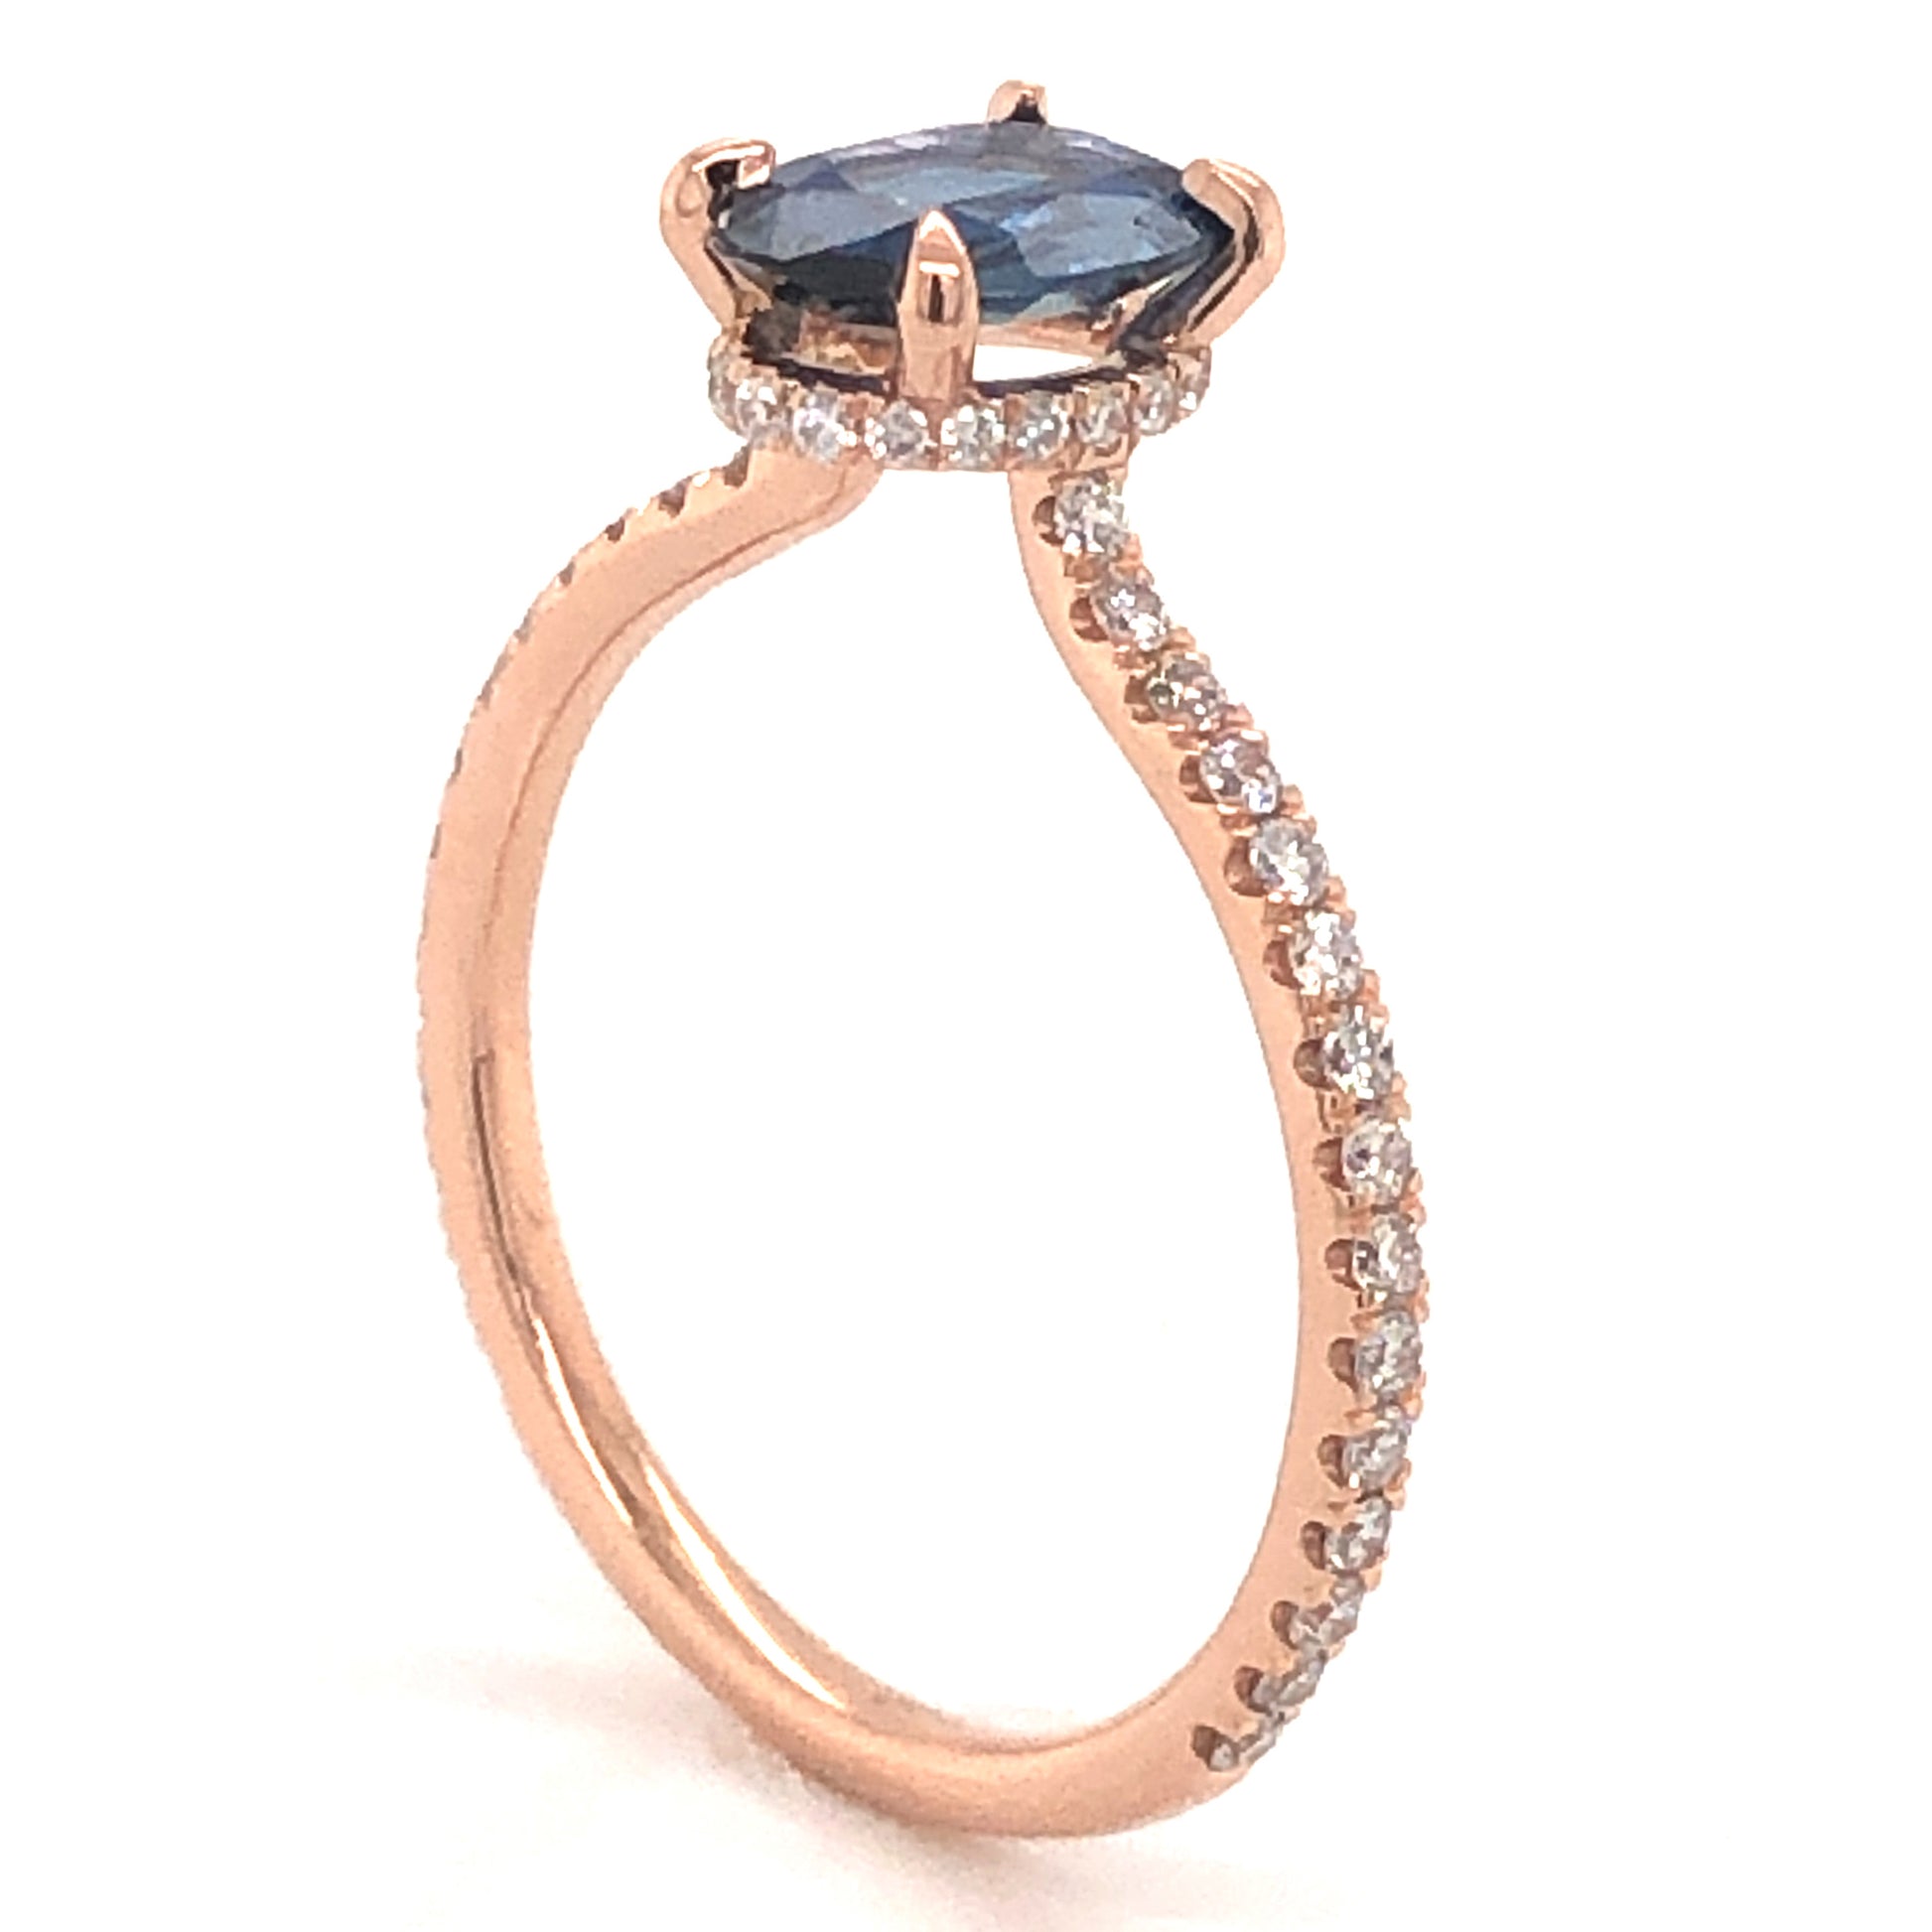 1.11 Oval Cut Sapphire Engagement Ring in 14k Rose Gold